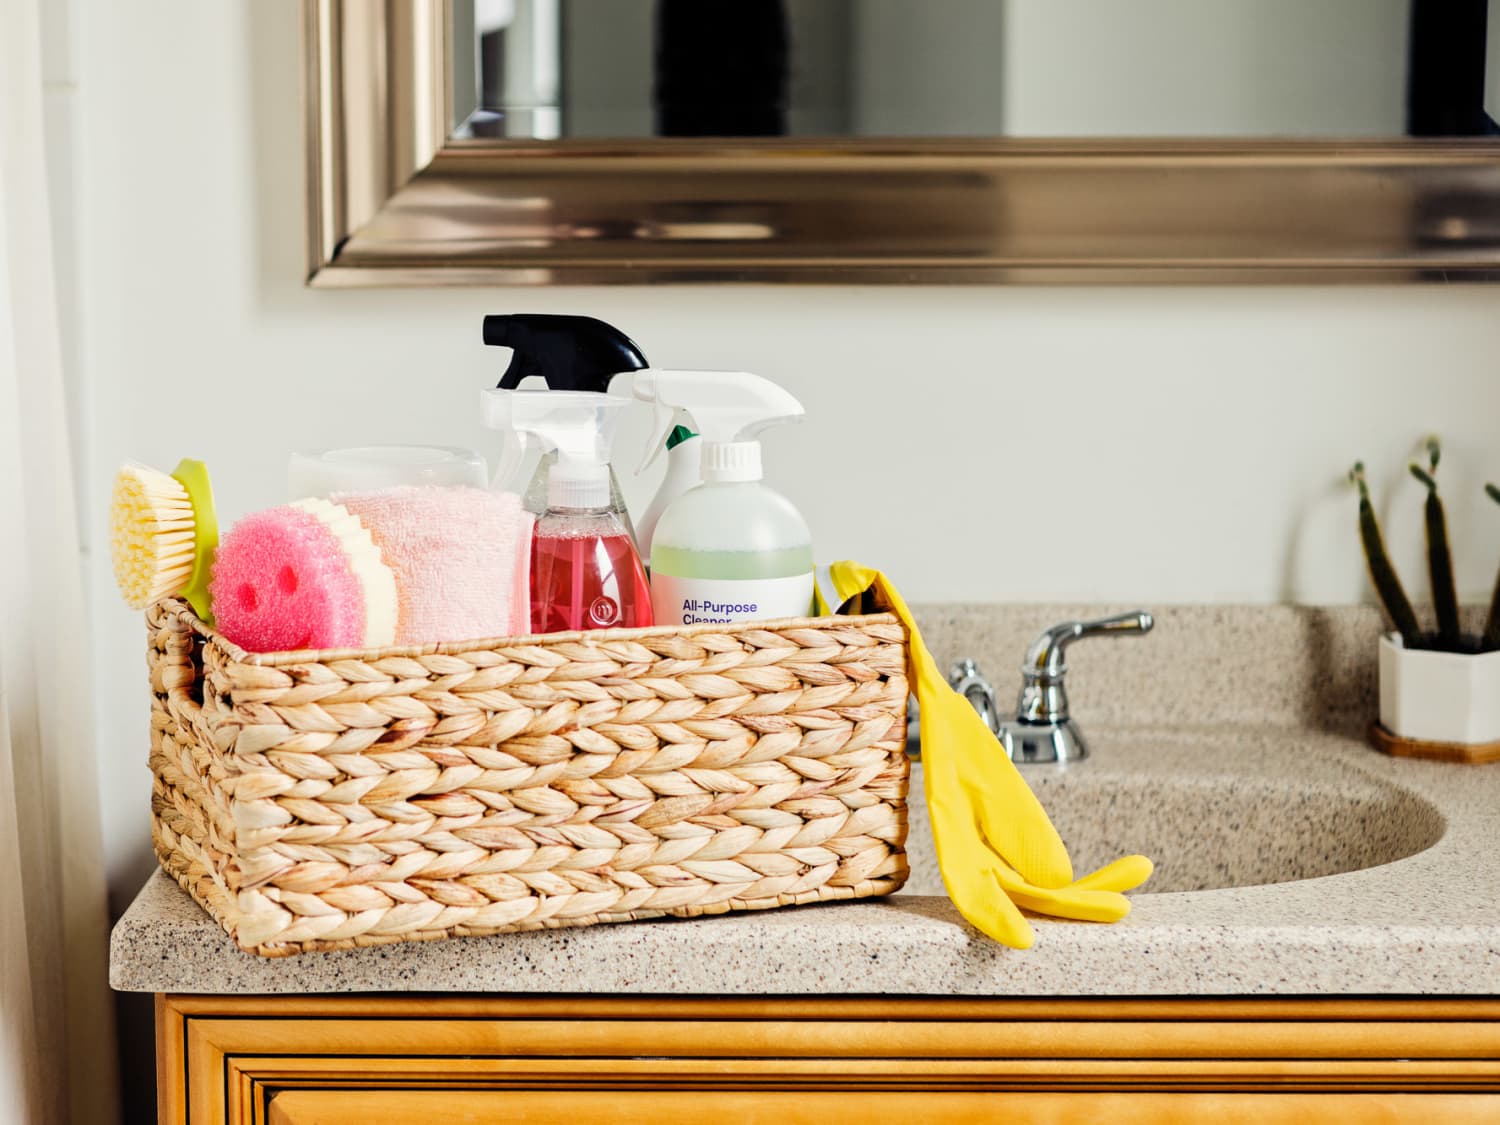 Kitchen, Bathroom and Multi-Purpose Cleaners for Your Home - Soft Scrub